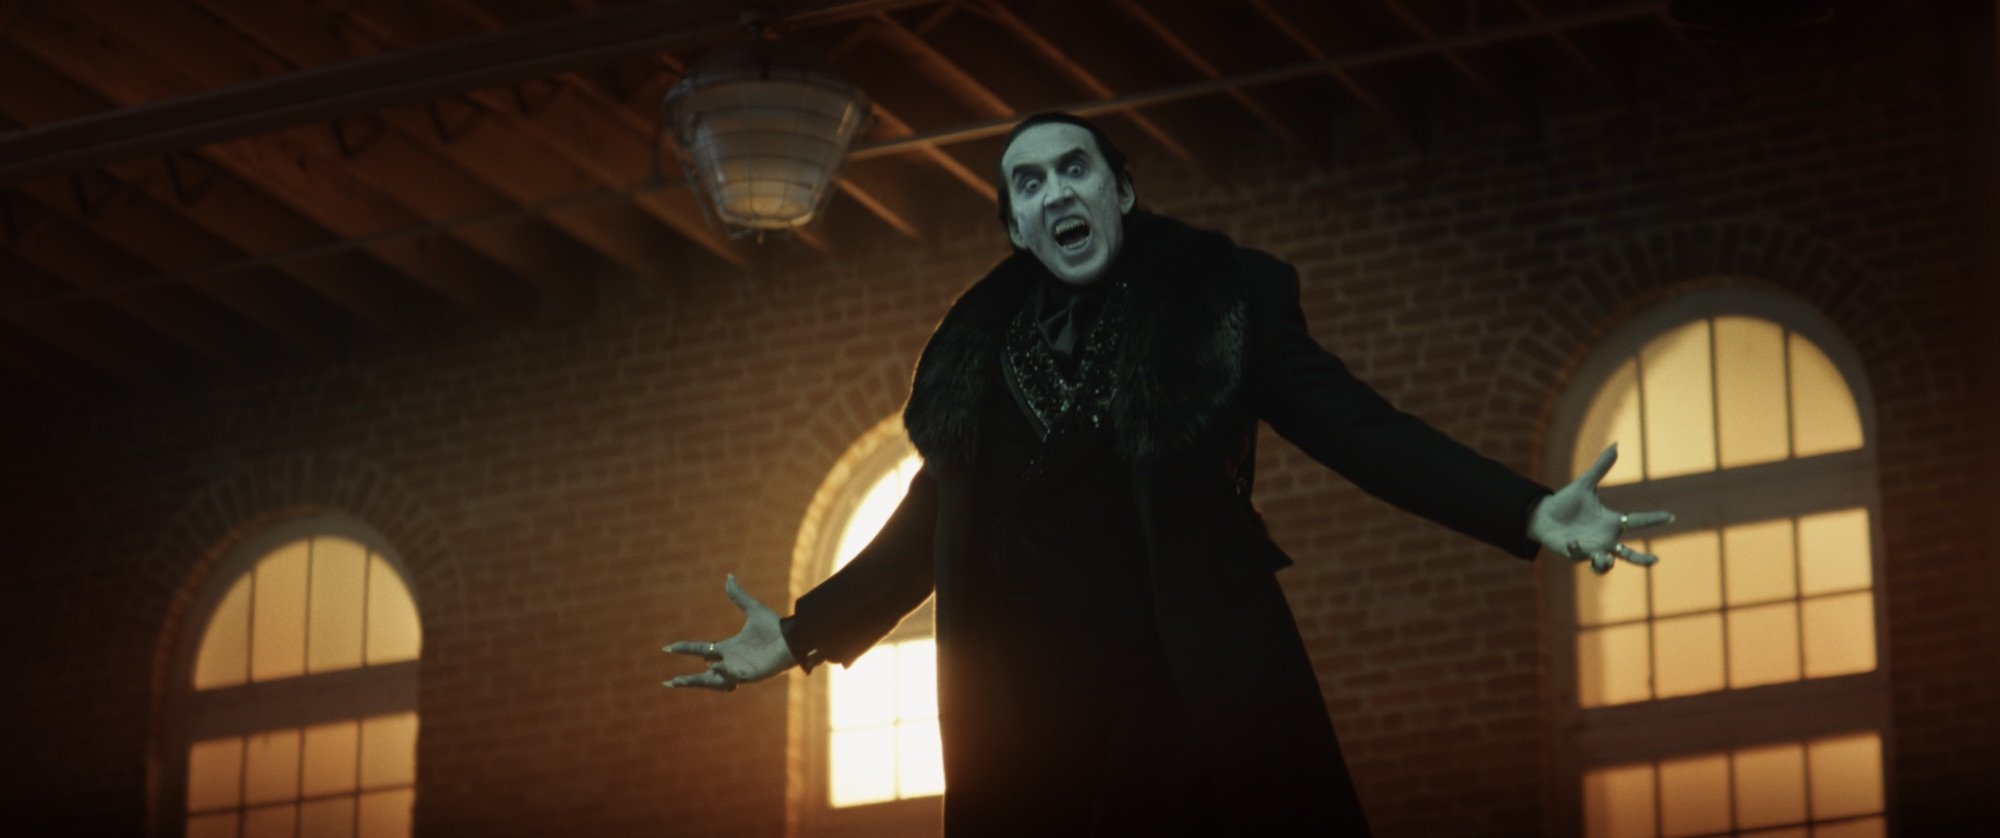 'Renfield' Nicolas Cage as Dracula levitating in the air, with his arms outreached. He's showing his vampire teeth.